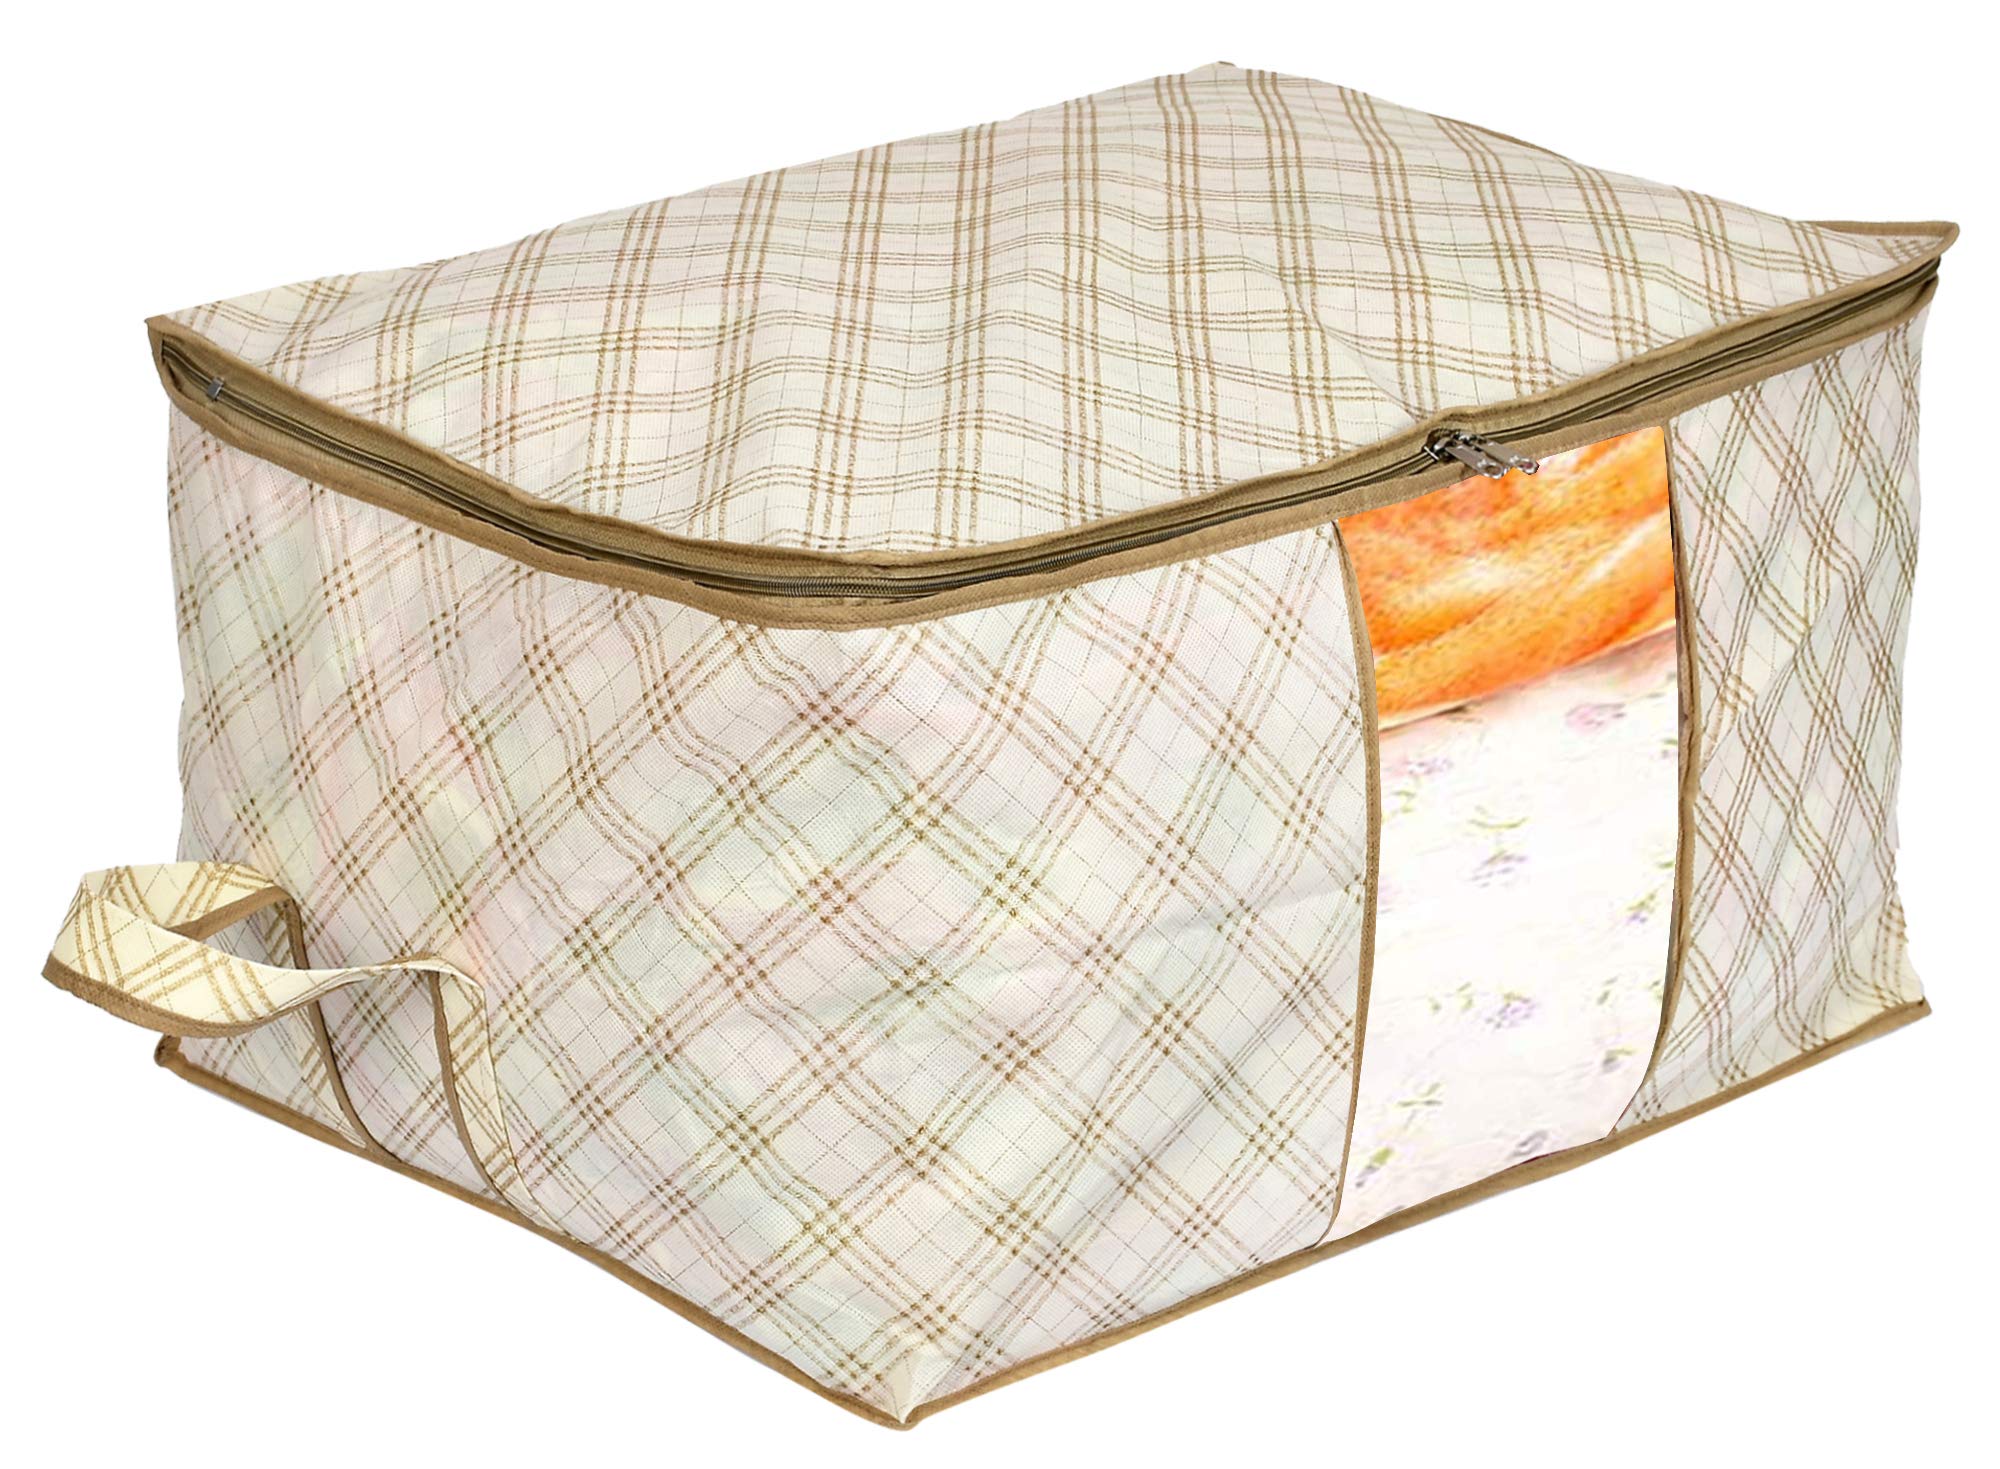 Kuber Industries Metallic Checkered Print Non-Woven Underbed Bag|Storage Organiser|Blanket Cover with Transparent Window|Storage Bag For Clothes Large (Ivory, pack of 1)